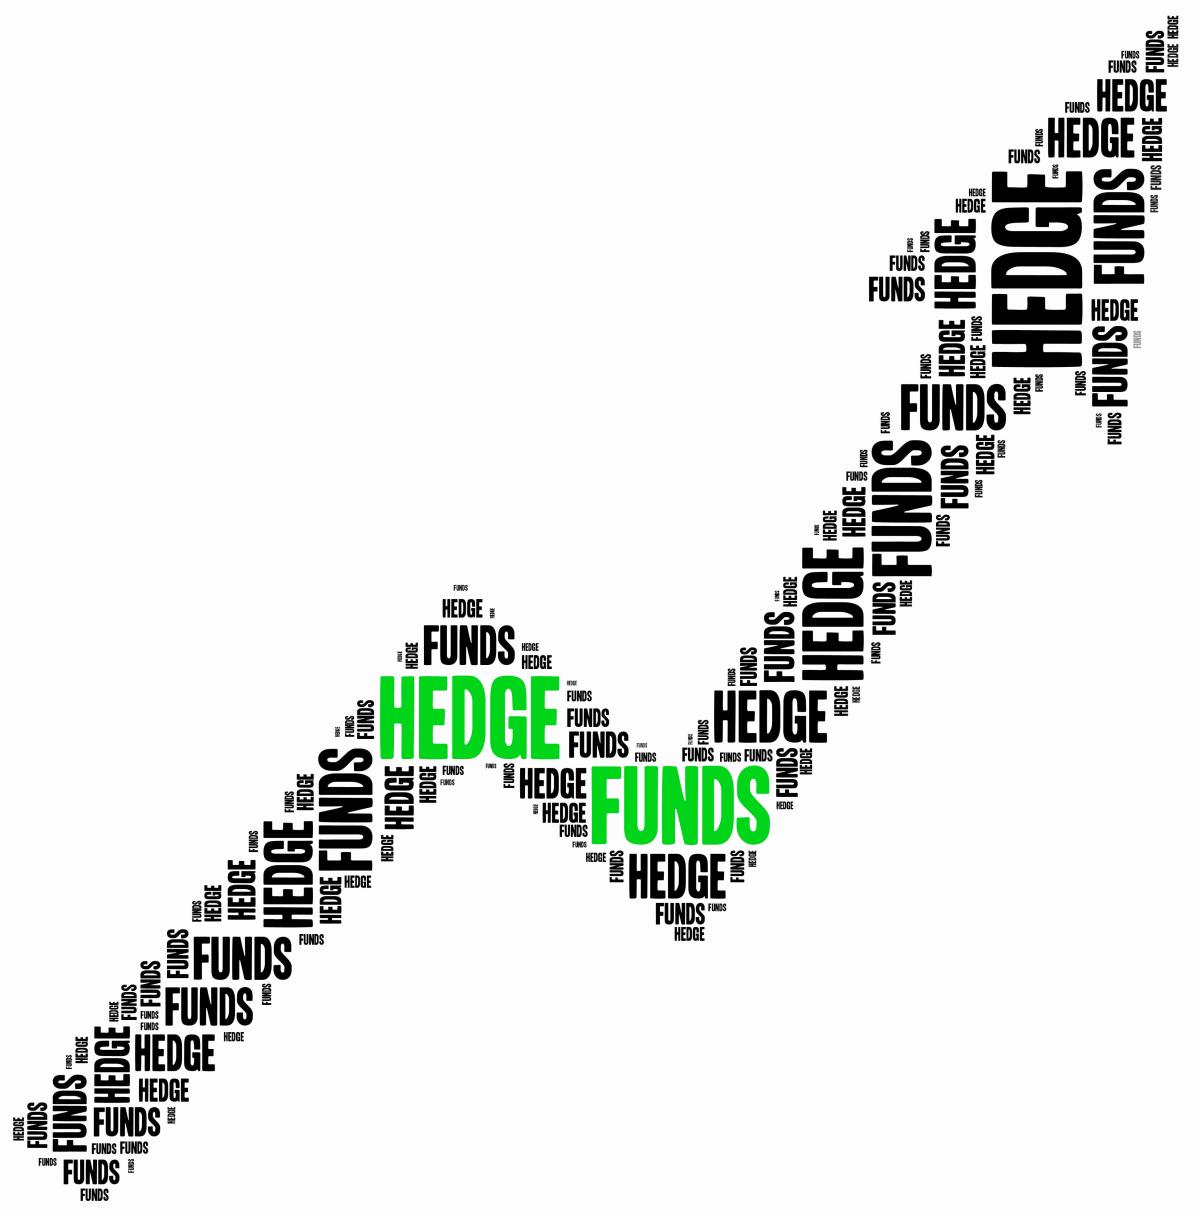 Evaluating Hedge Funds Through a Different Lens